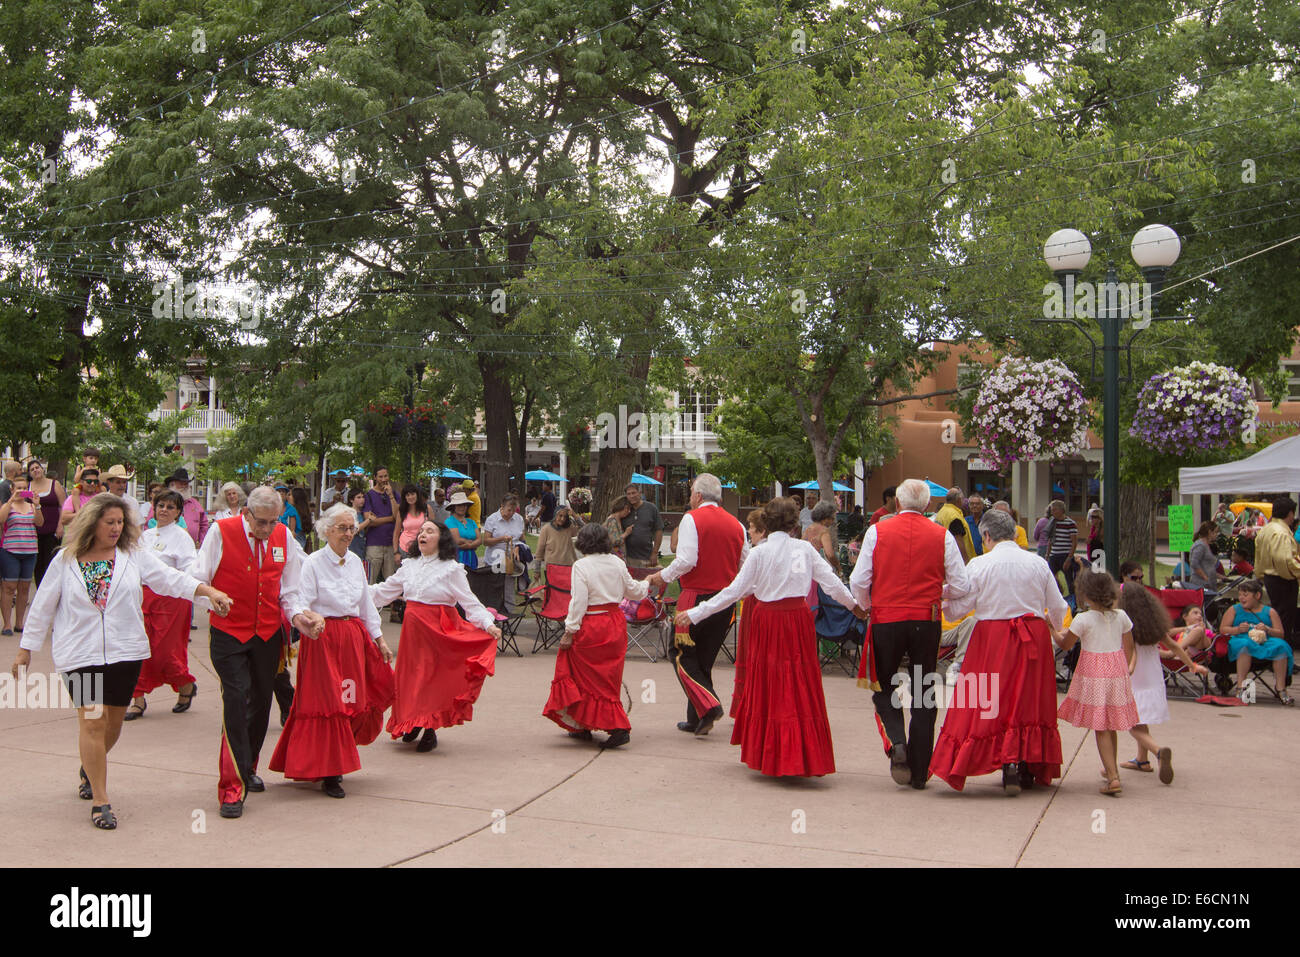 Societa Colonial Espanola, a New Mexican folkloric group, performing traditional dances during Santa Fe Bandstand 2014. Stock Photo